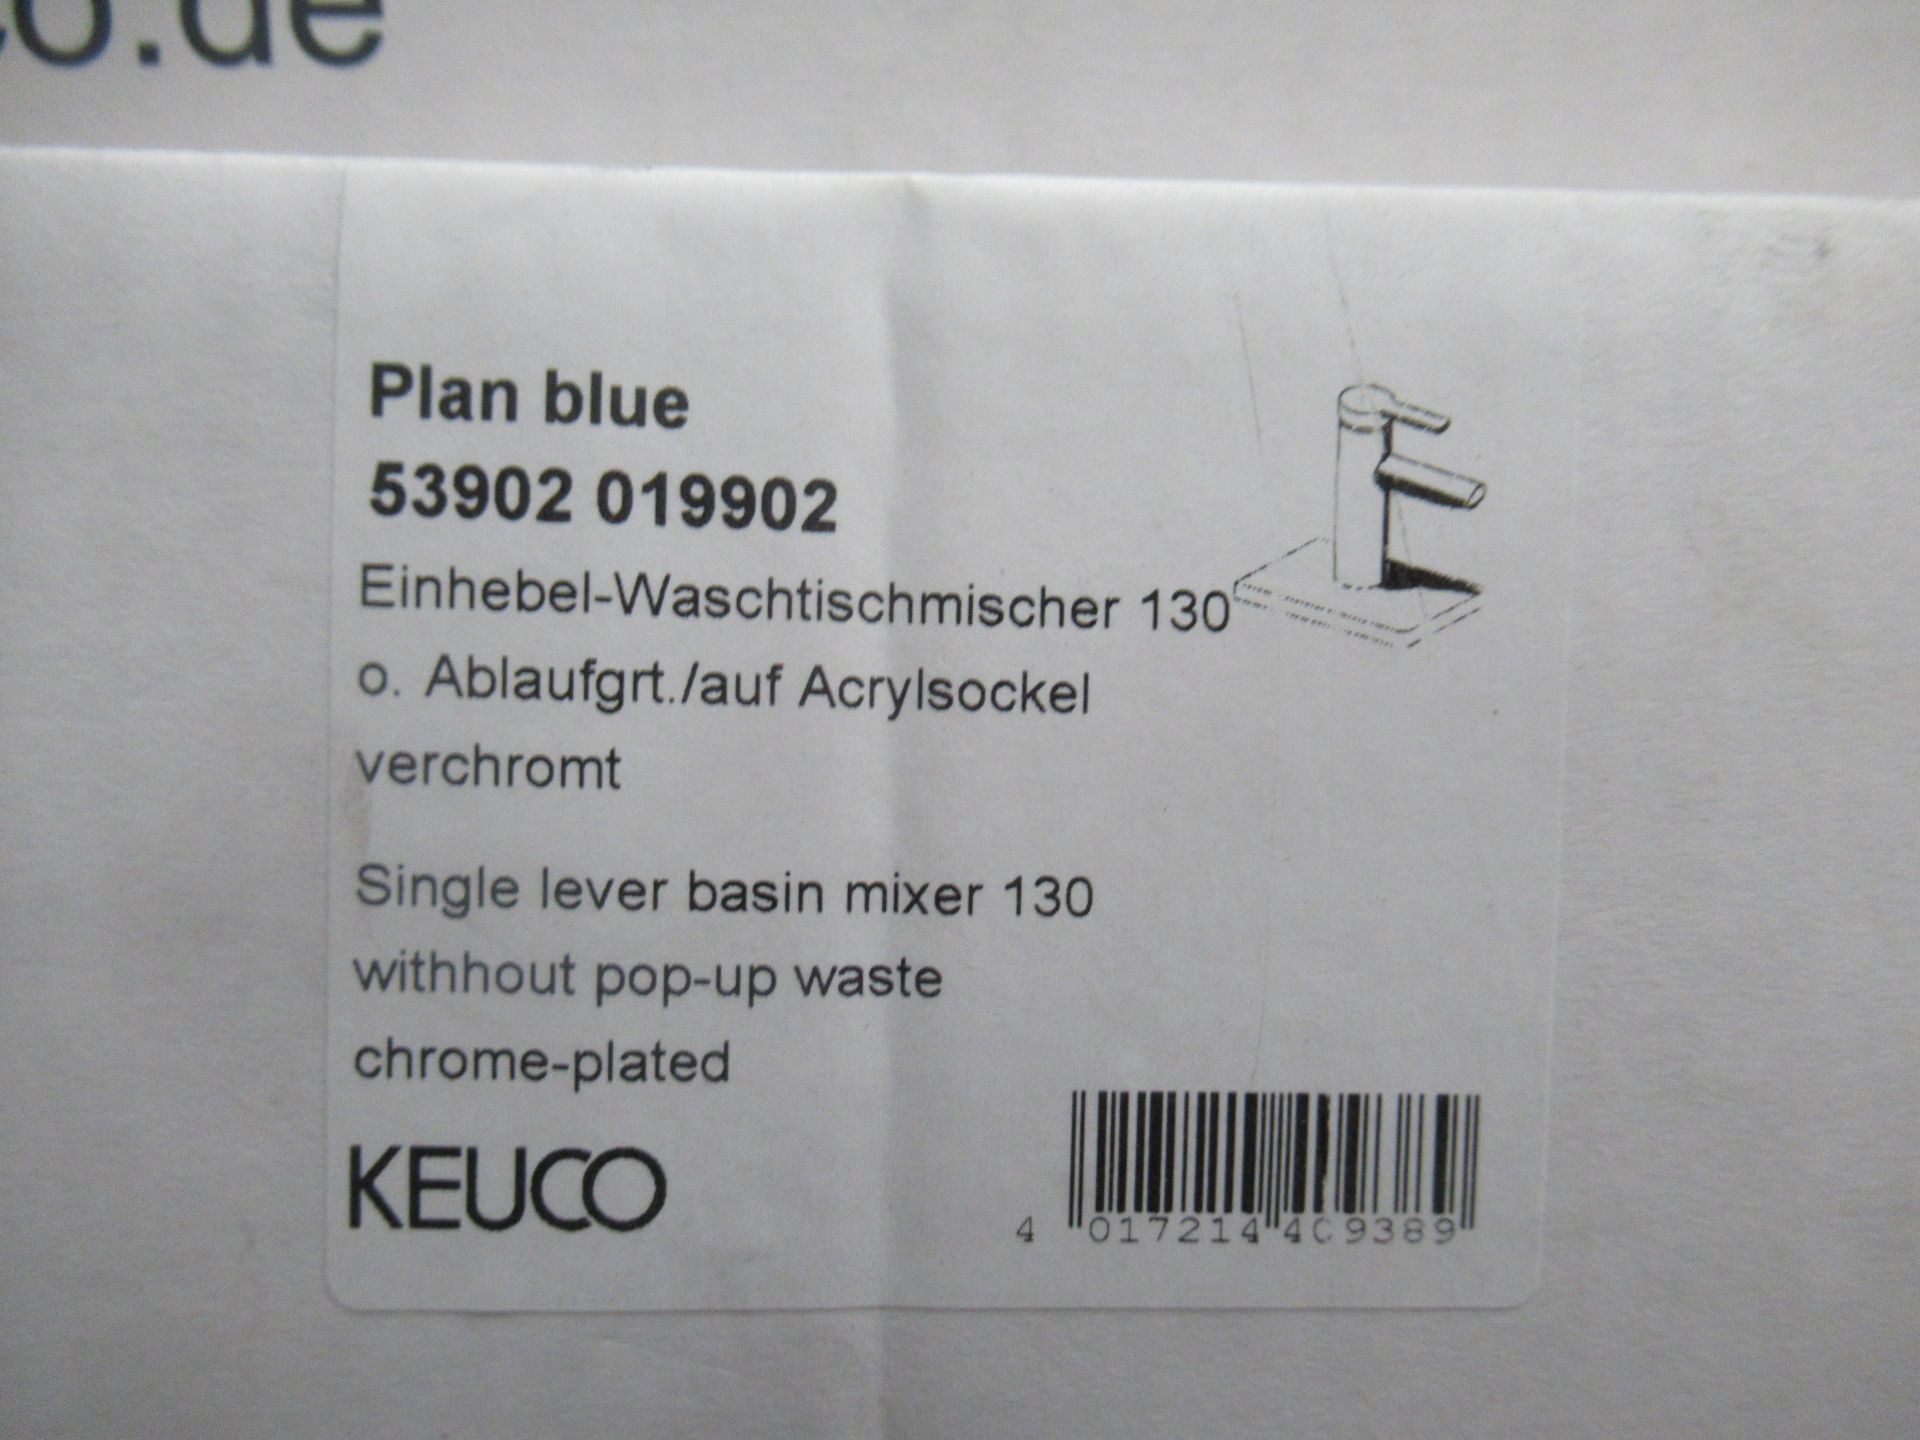 2 x Keuco Plan Blue - Single Lever Basin Mixer 130-Tap, Chrome Plated, P/N 53902-019902 - Image 2 of 3